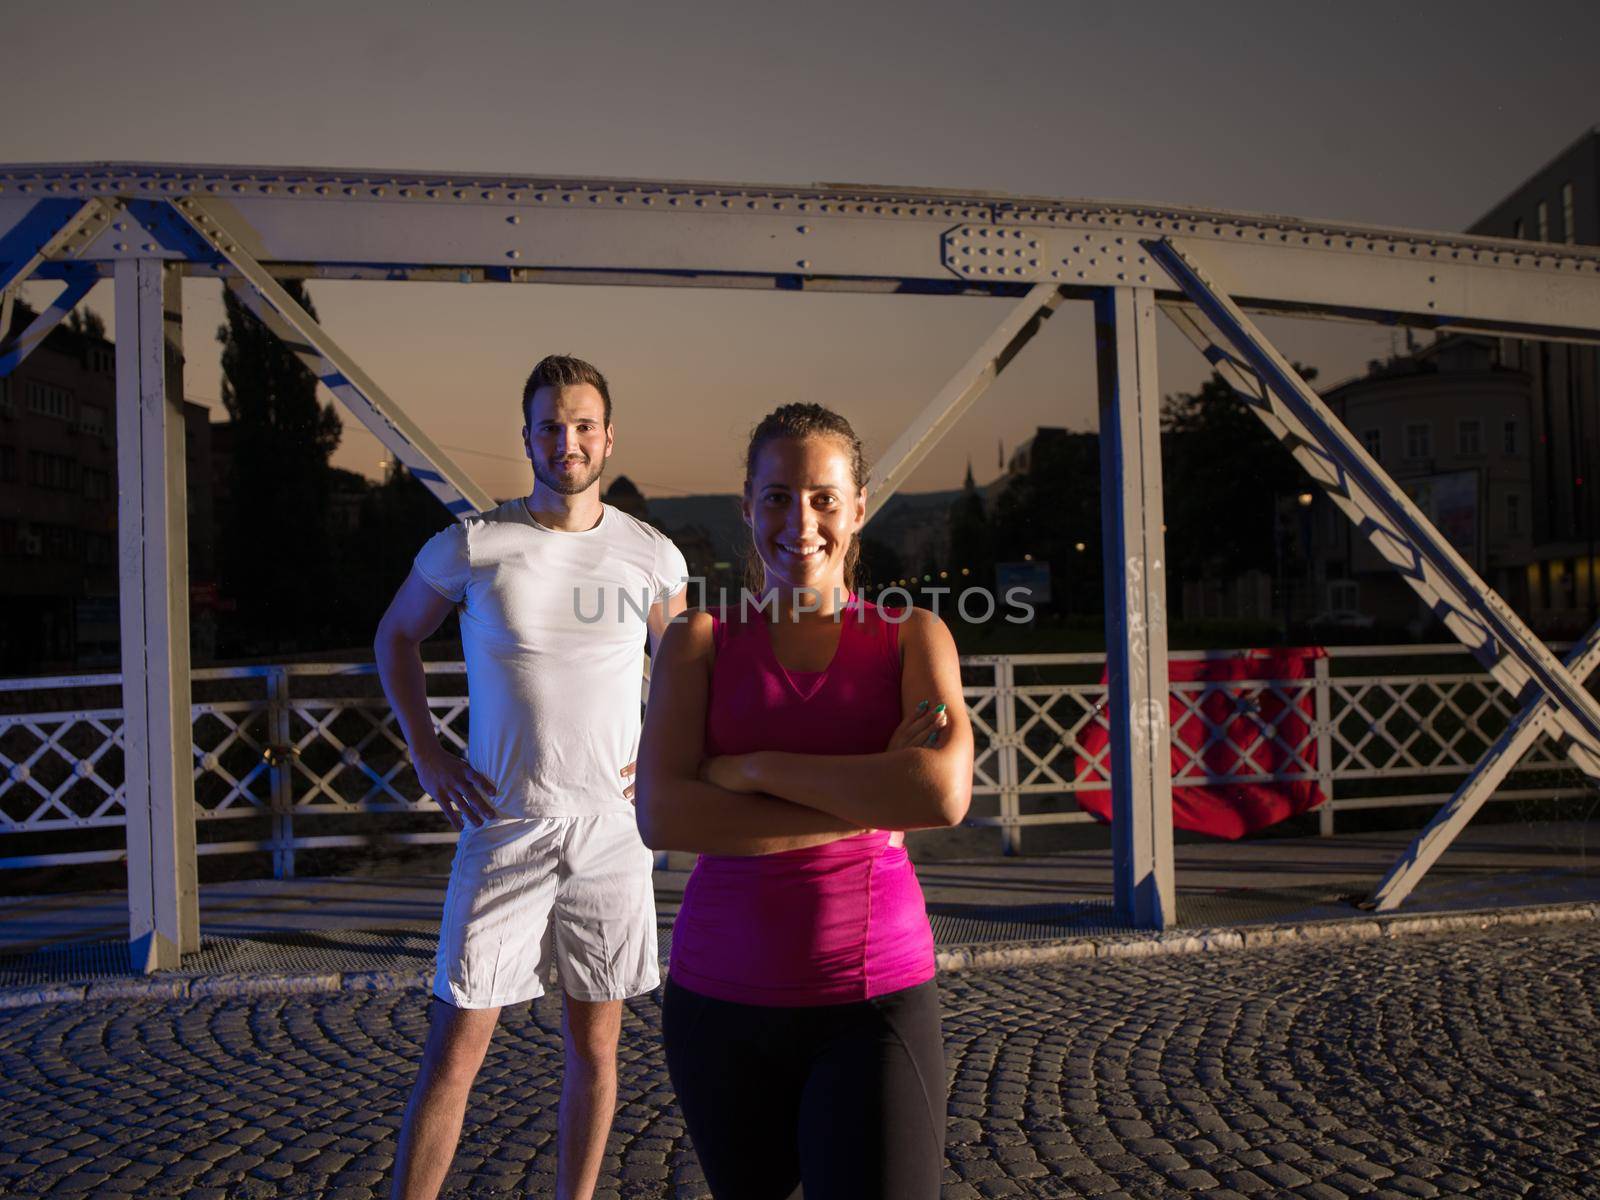 urban sports, portrait of a healthy couple jogging across the bridge in the city at early morning in night